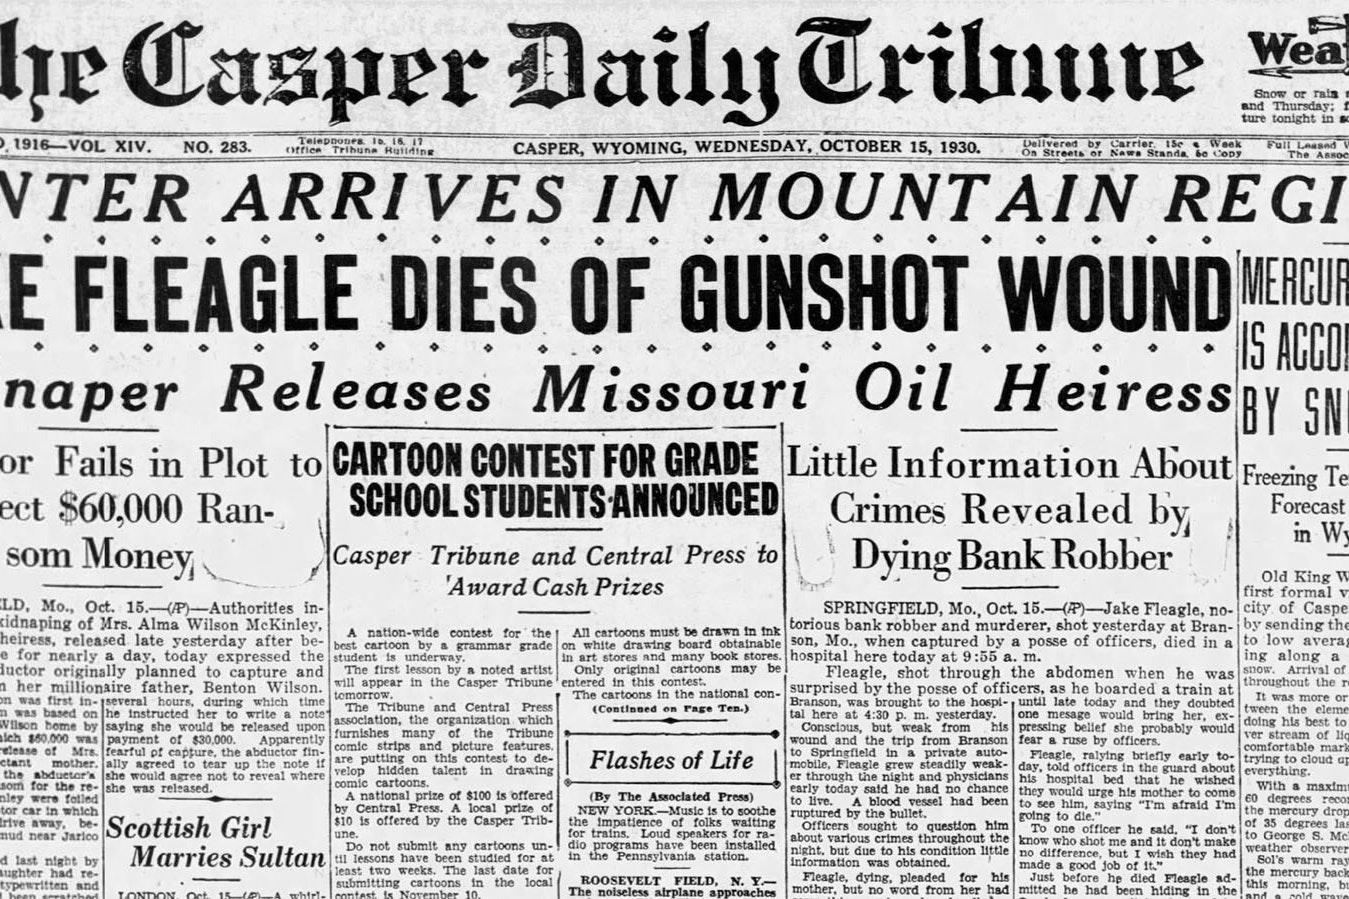 Headlines in Casper newspapers in the early 1930s were filled with reports about bank robberies.